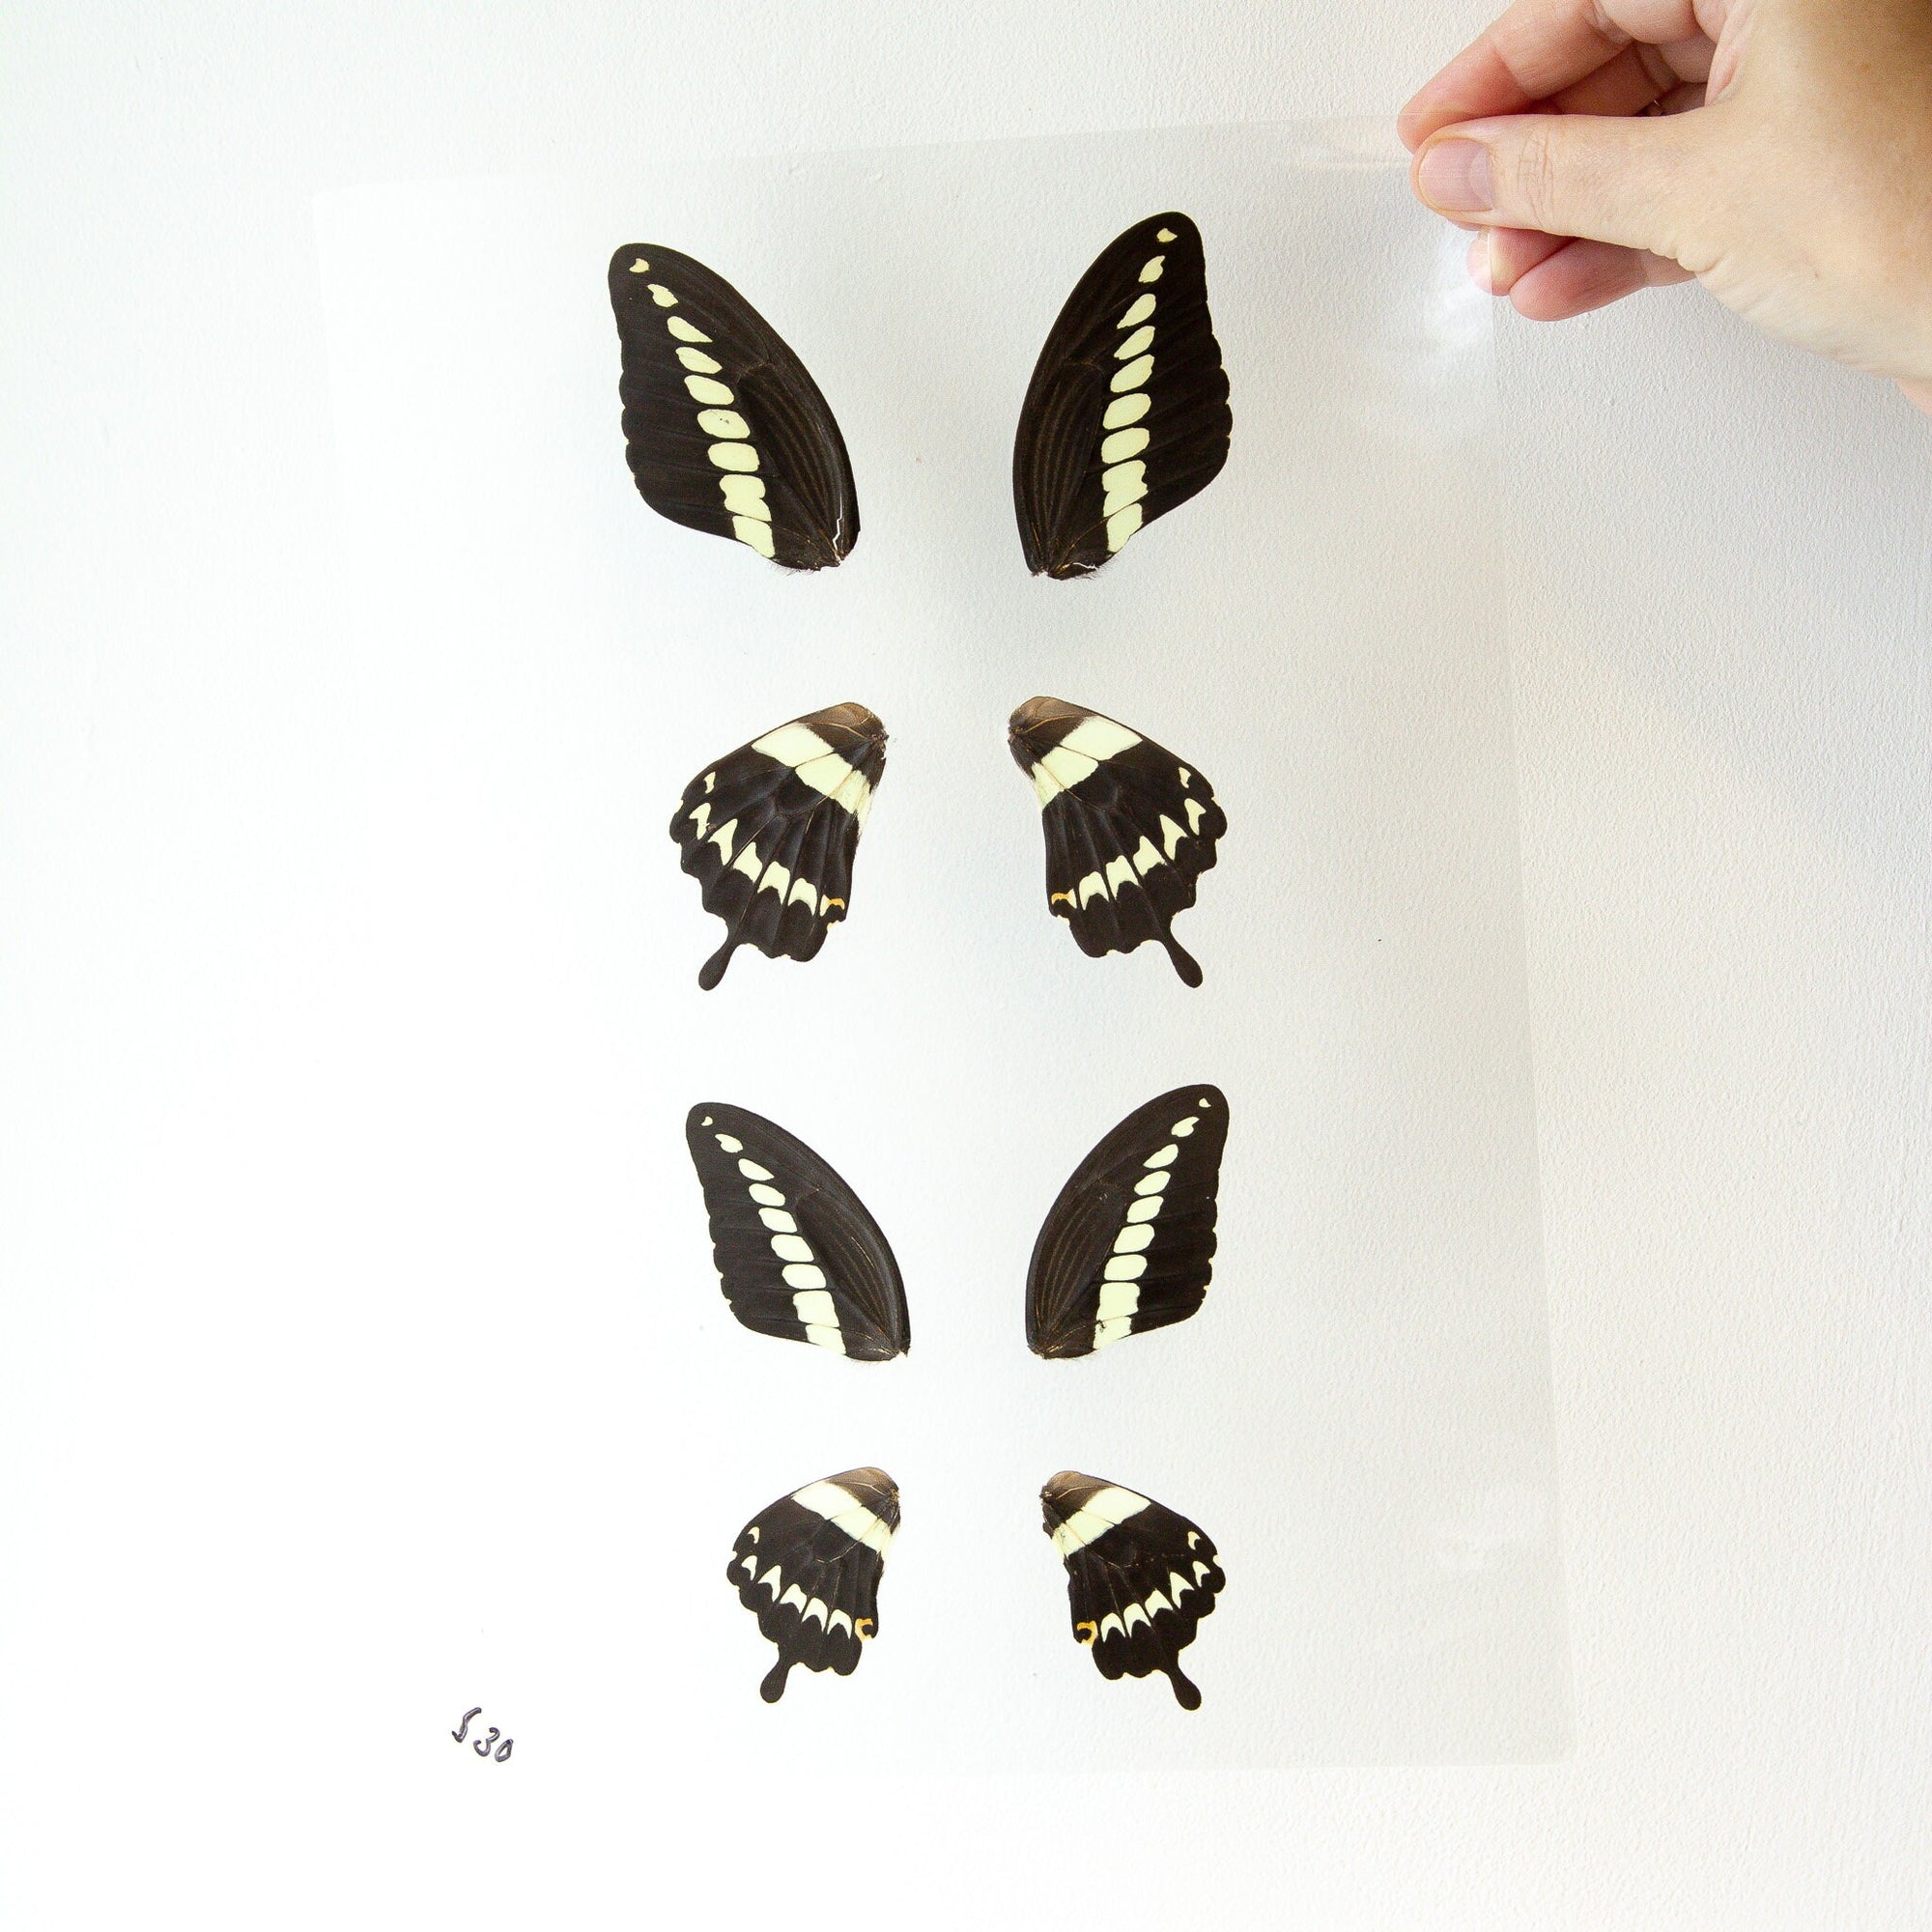 Butterfly Wings GLOSSY LAMINATED SHEET Real Ethically Sourced Specimens Moths Butterflies Wings for Art -- S30